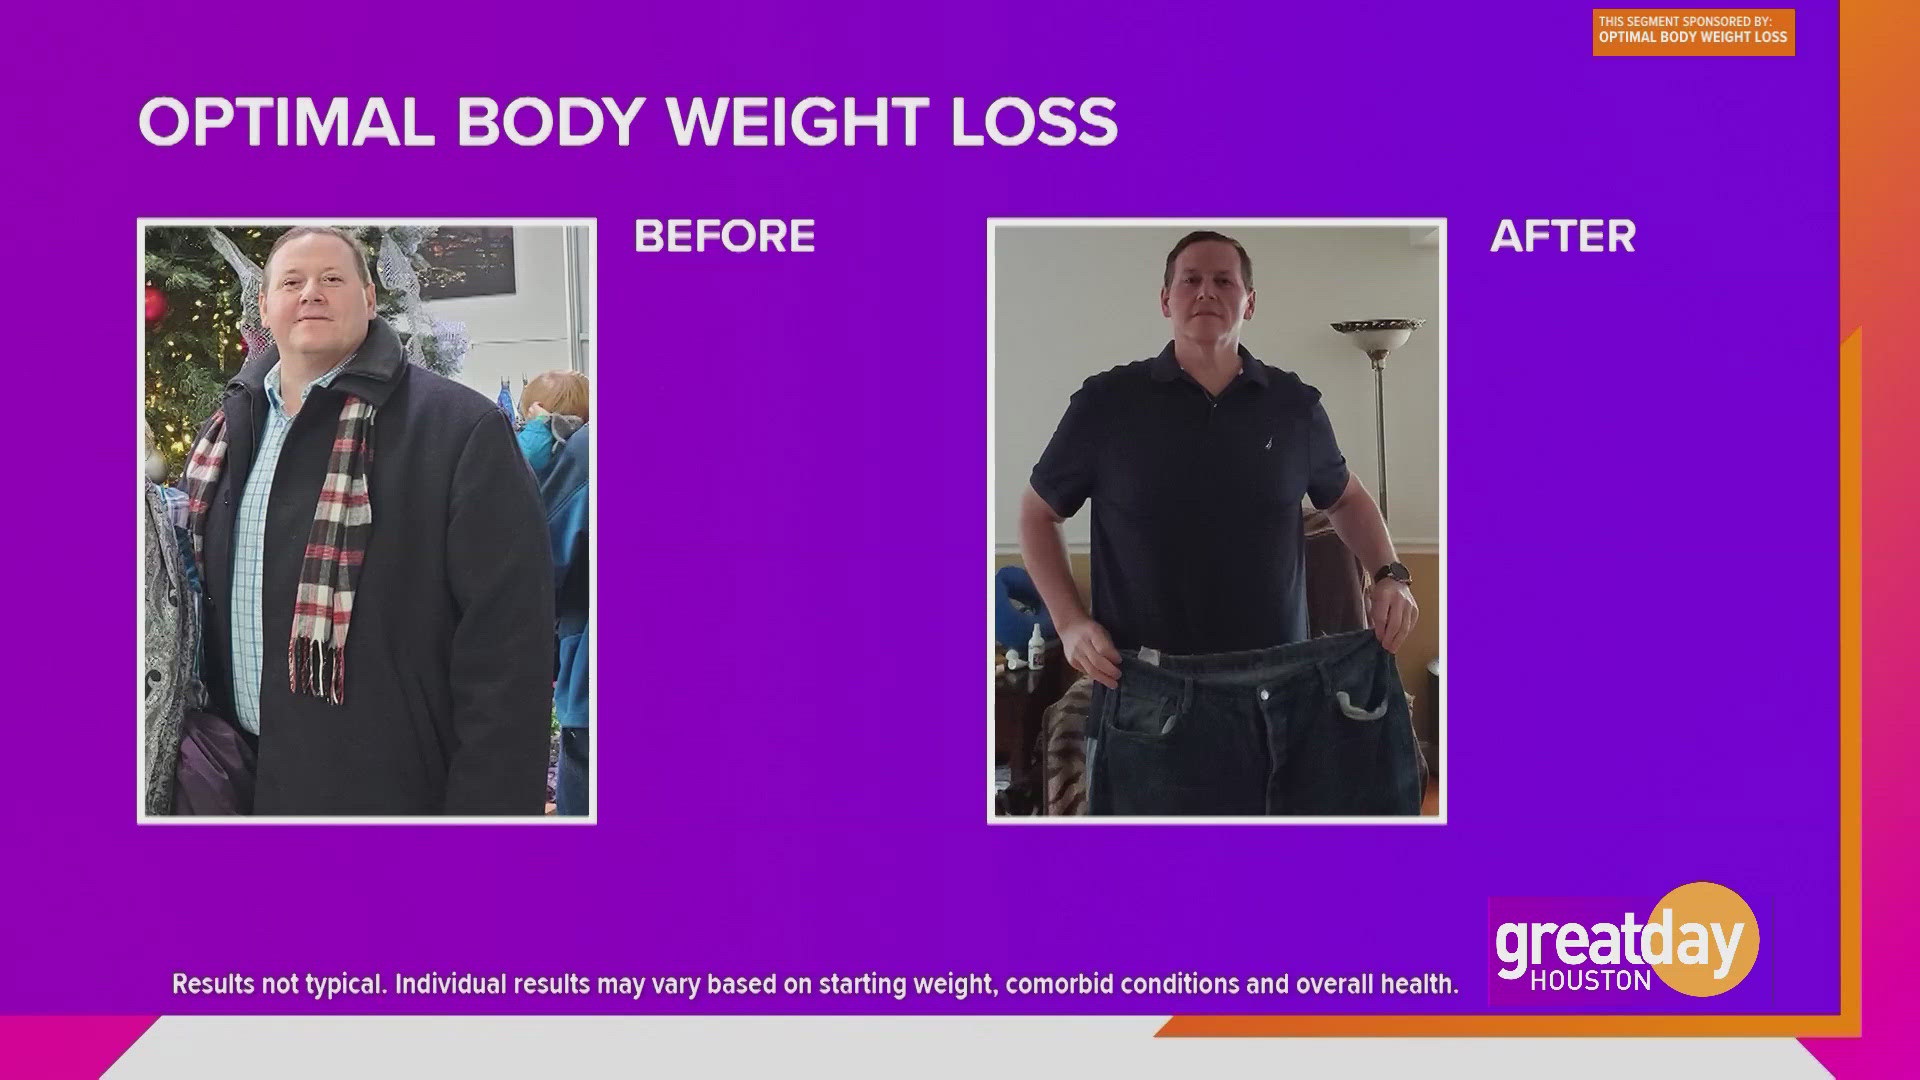 Optimal Body Weight Loss creates personalized programs designed to drop the pounds for good